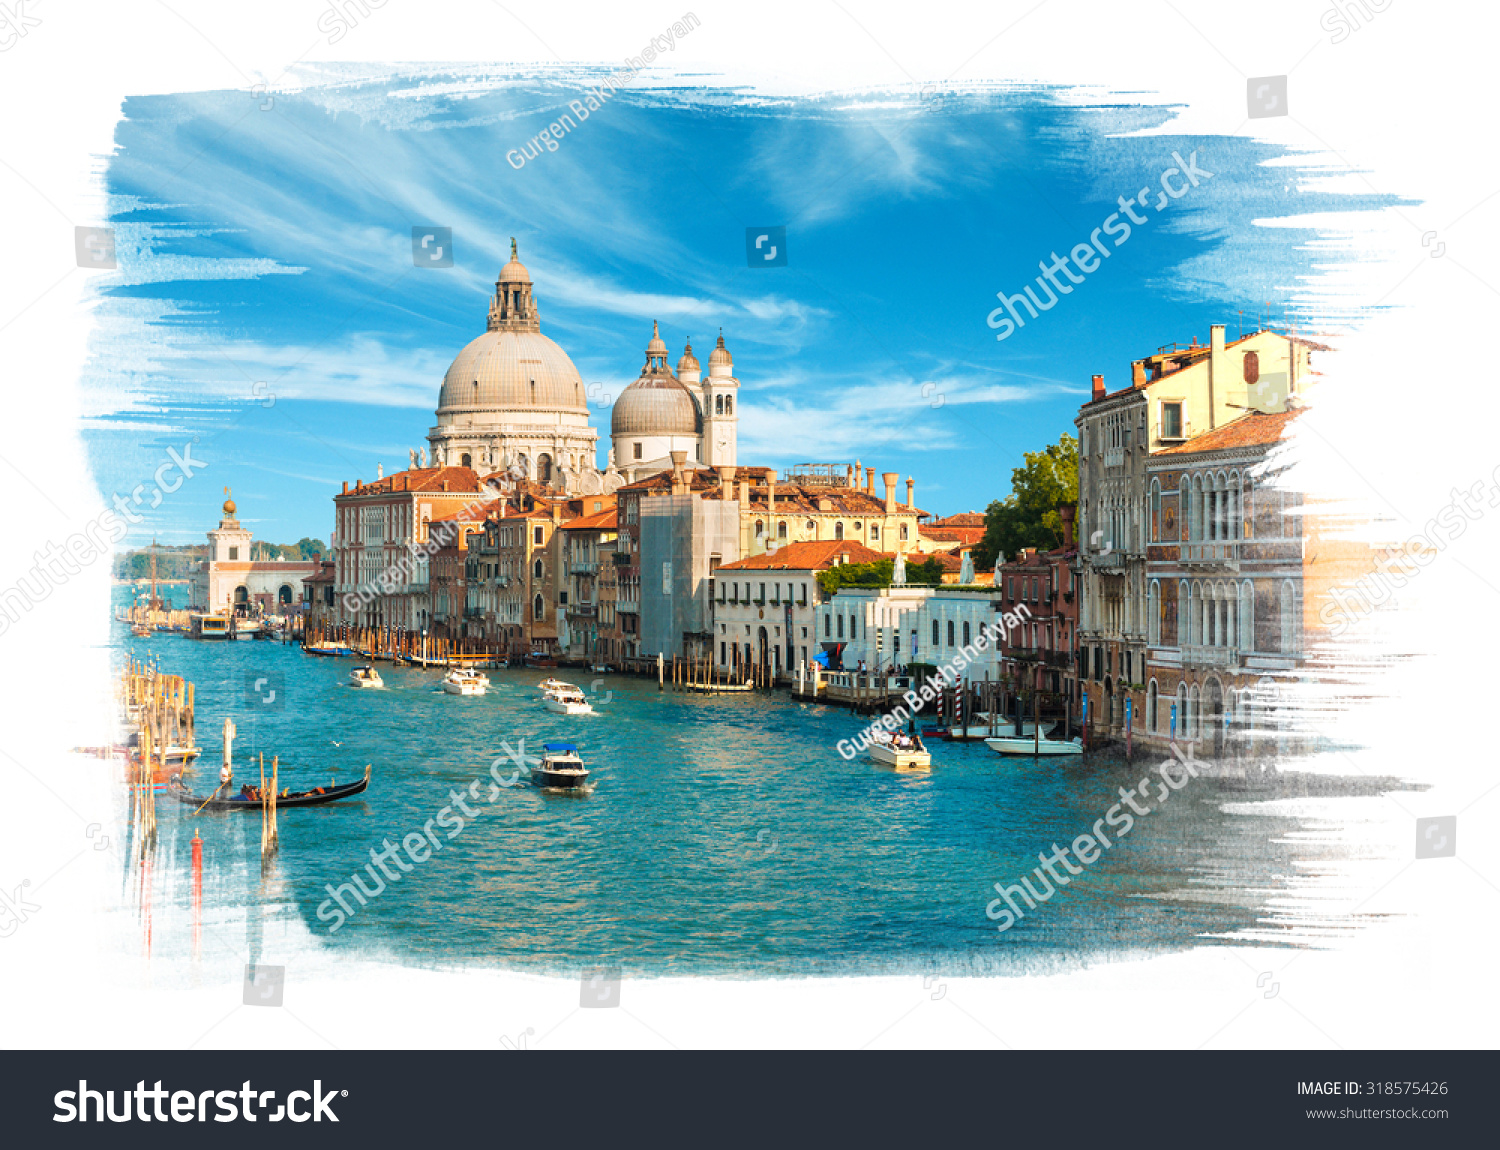 Painting of the Grand Canal and Basilica Santa Maria della Salute in the late evening, Venice, Italy #318575426